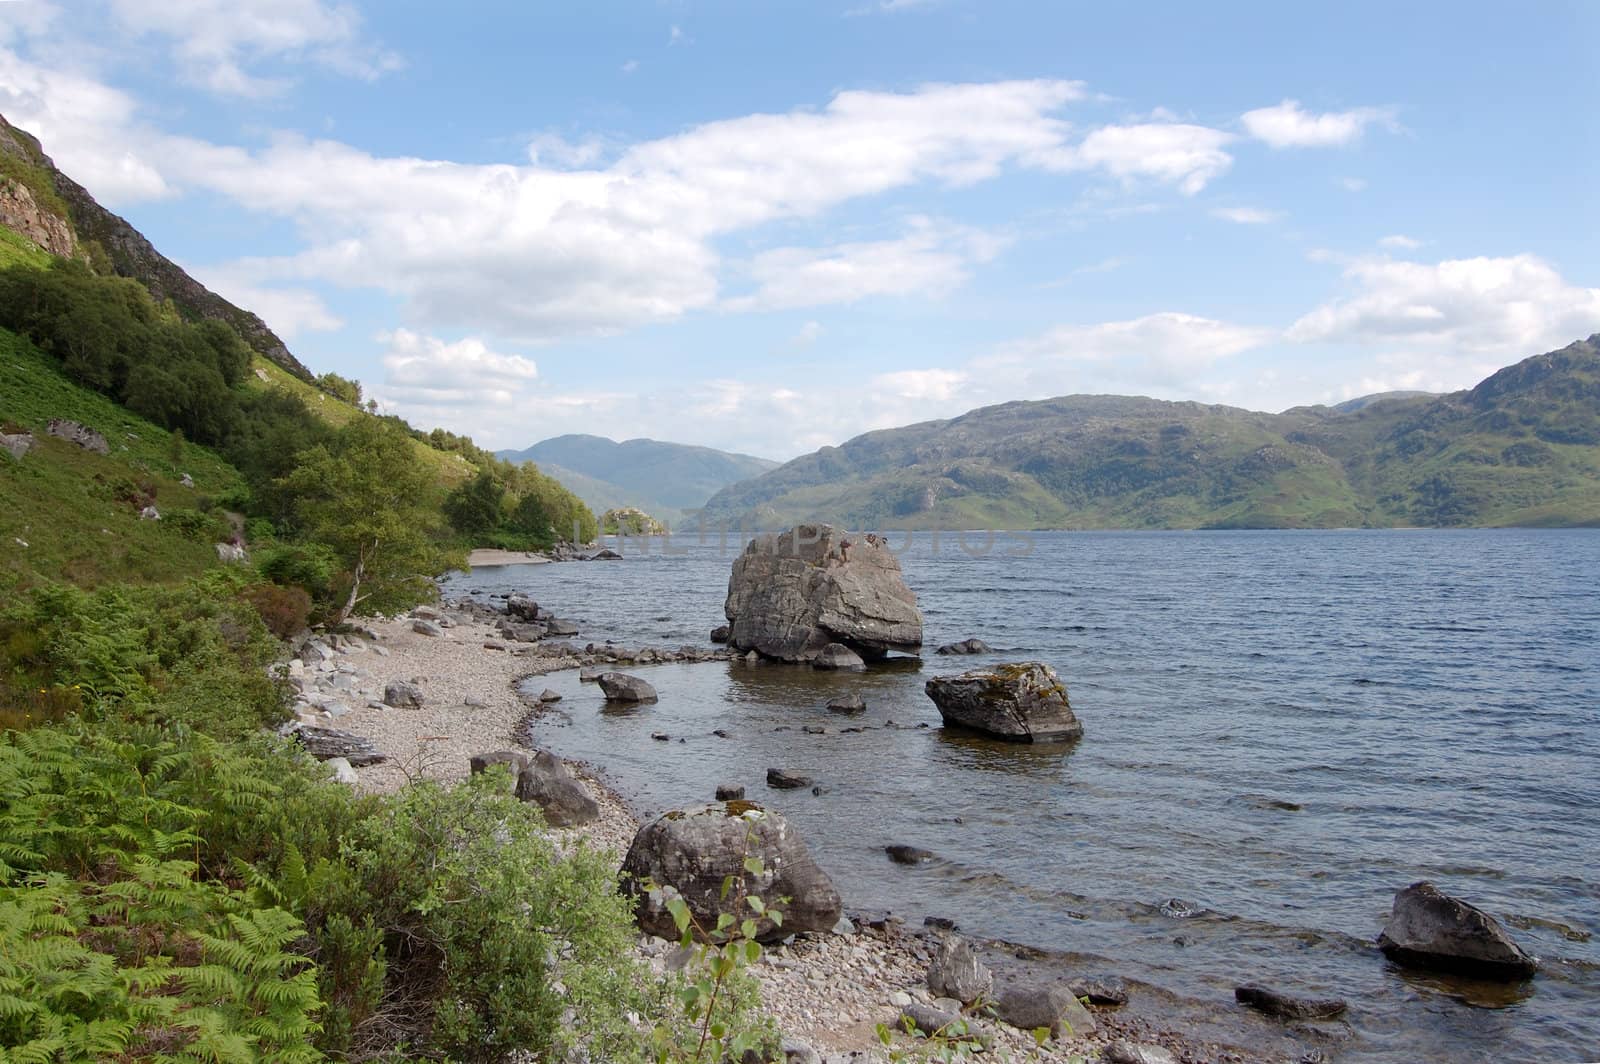 Looking toward the south Morar hills from the north shore of Loch Morar, Scotland with alarge rock on the loch foreshore